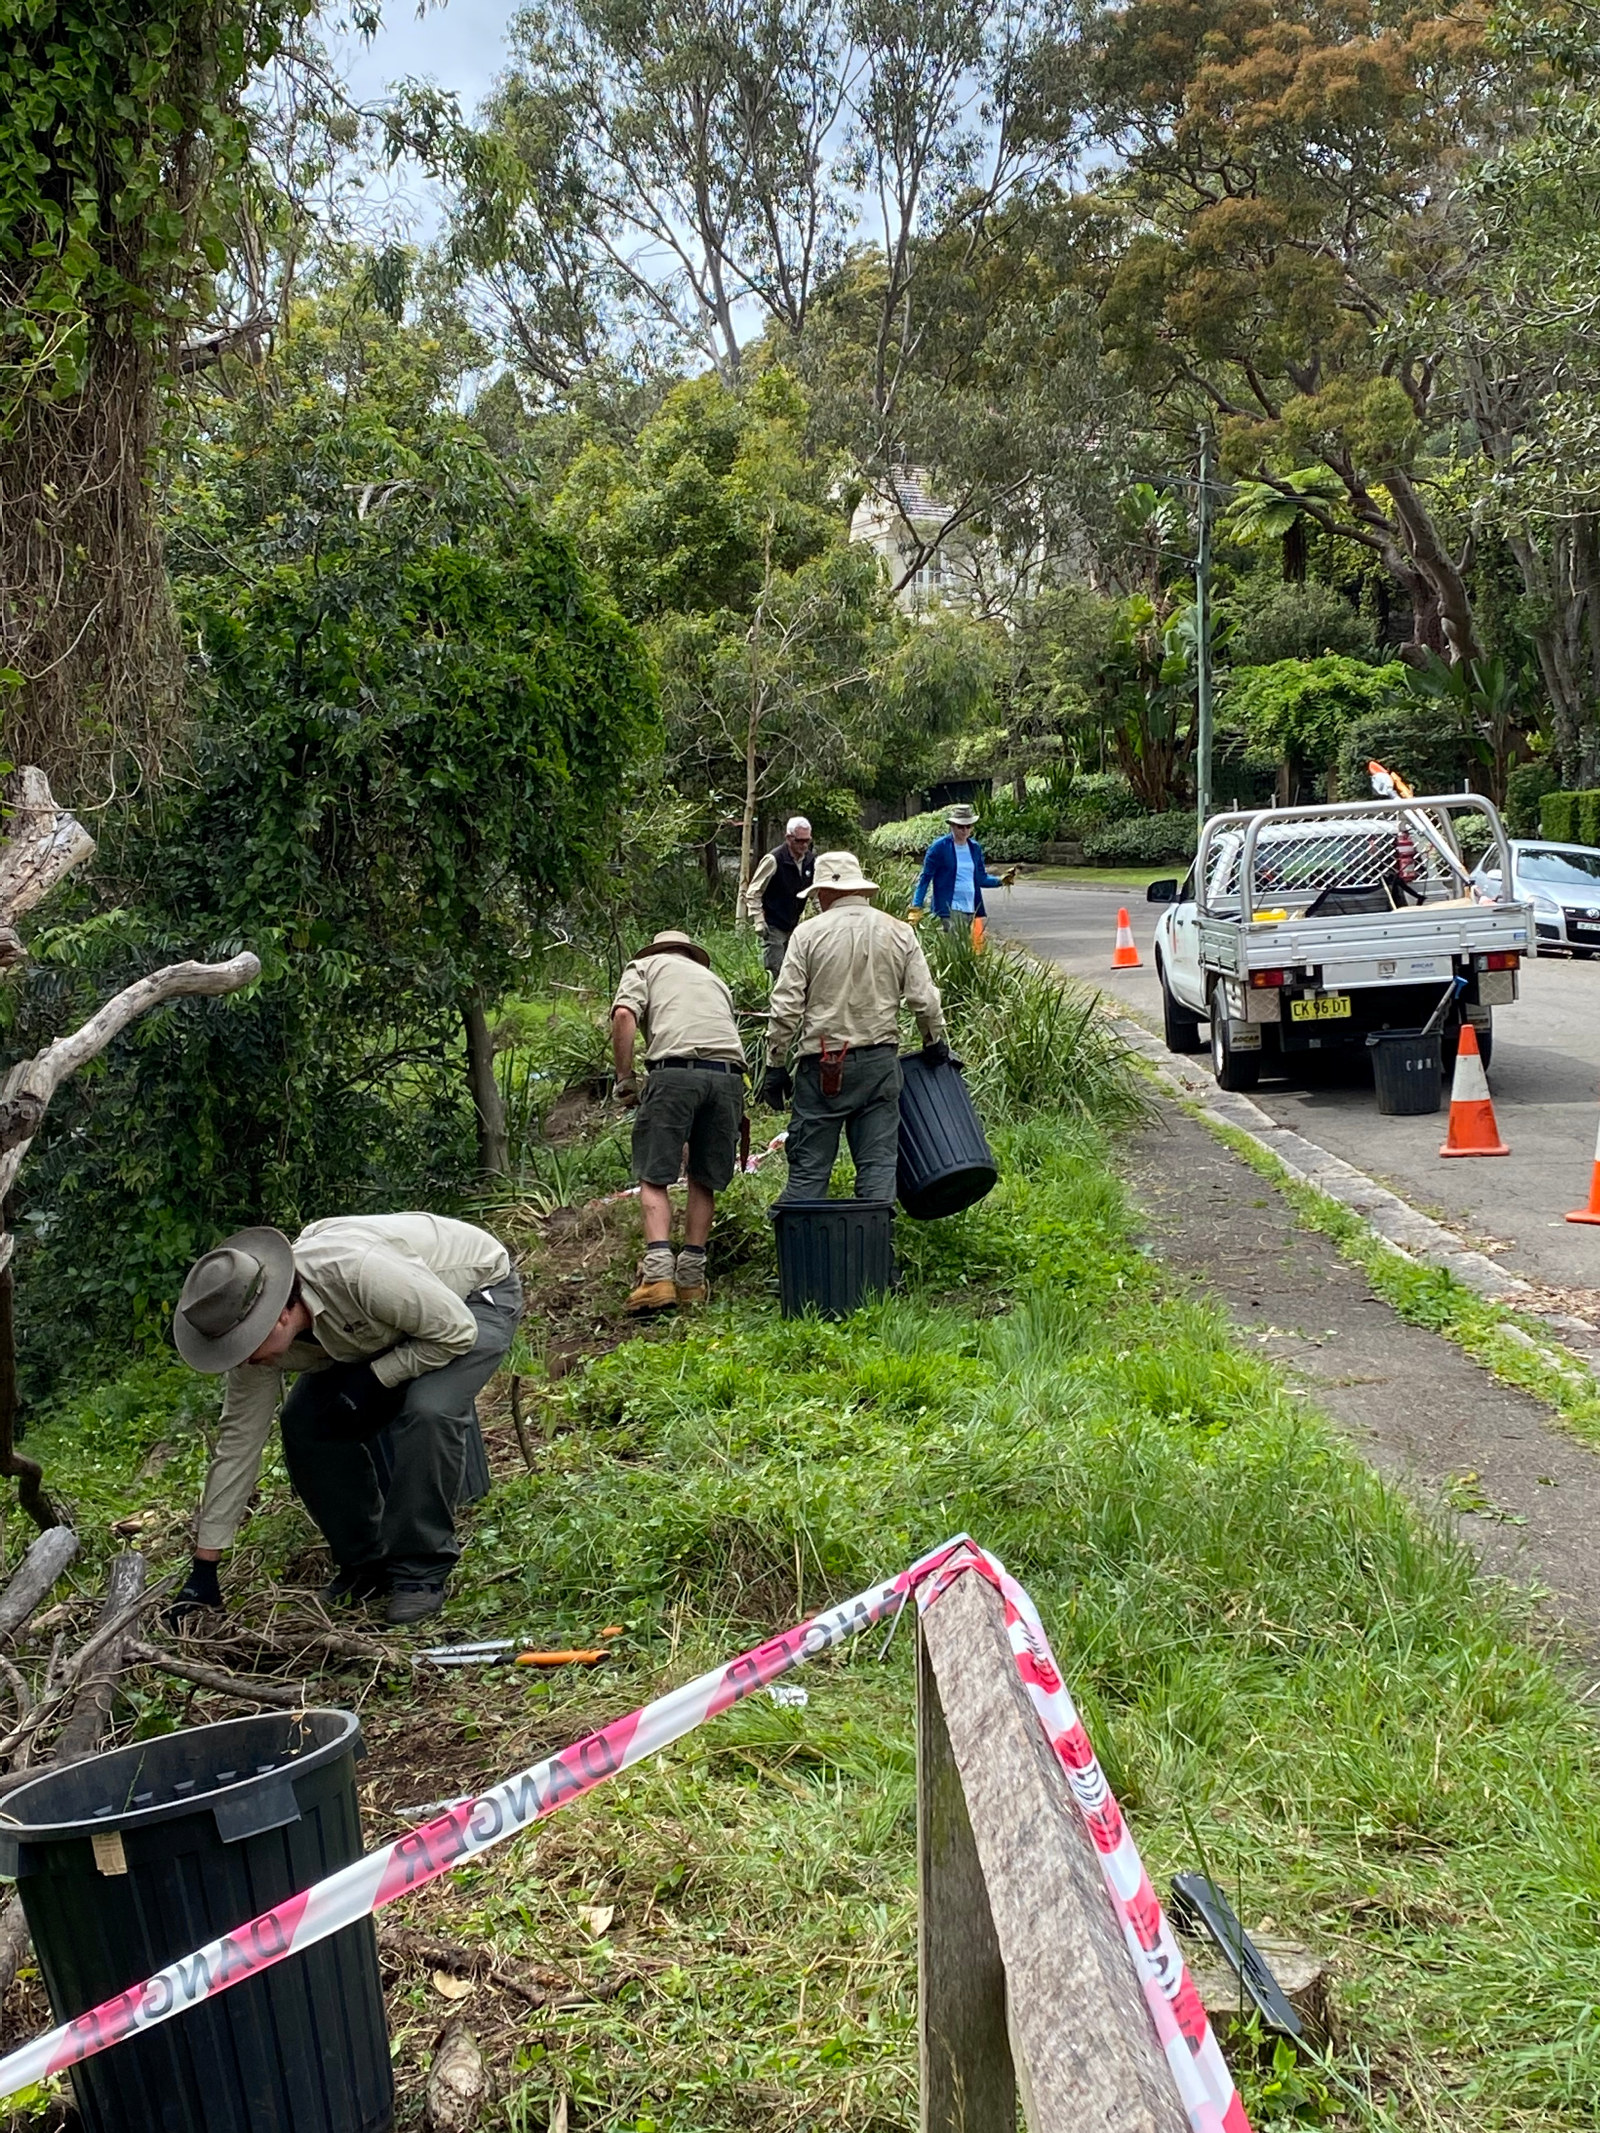 Sydney Living Museums staff work together in the bush to remove unwanted weed species. the team load waste into buckets then onto the Ute parked on the street to the right.